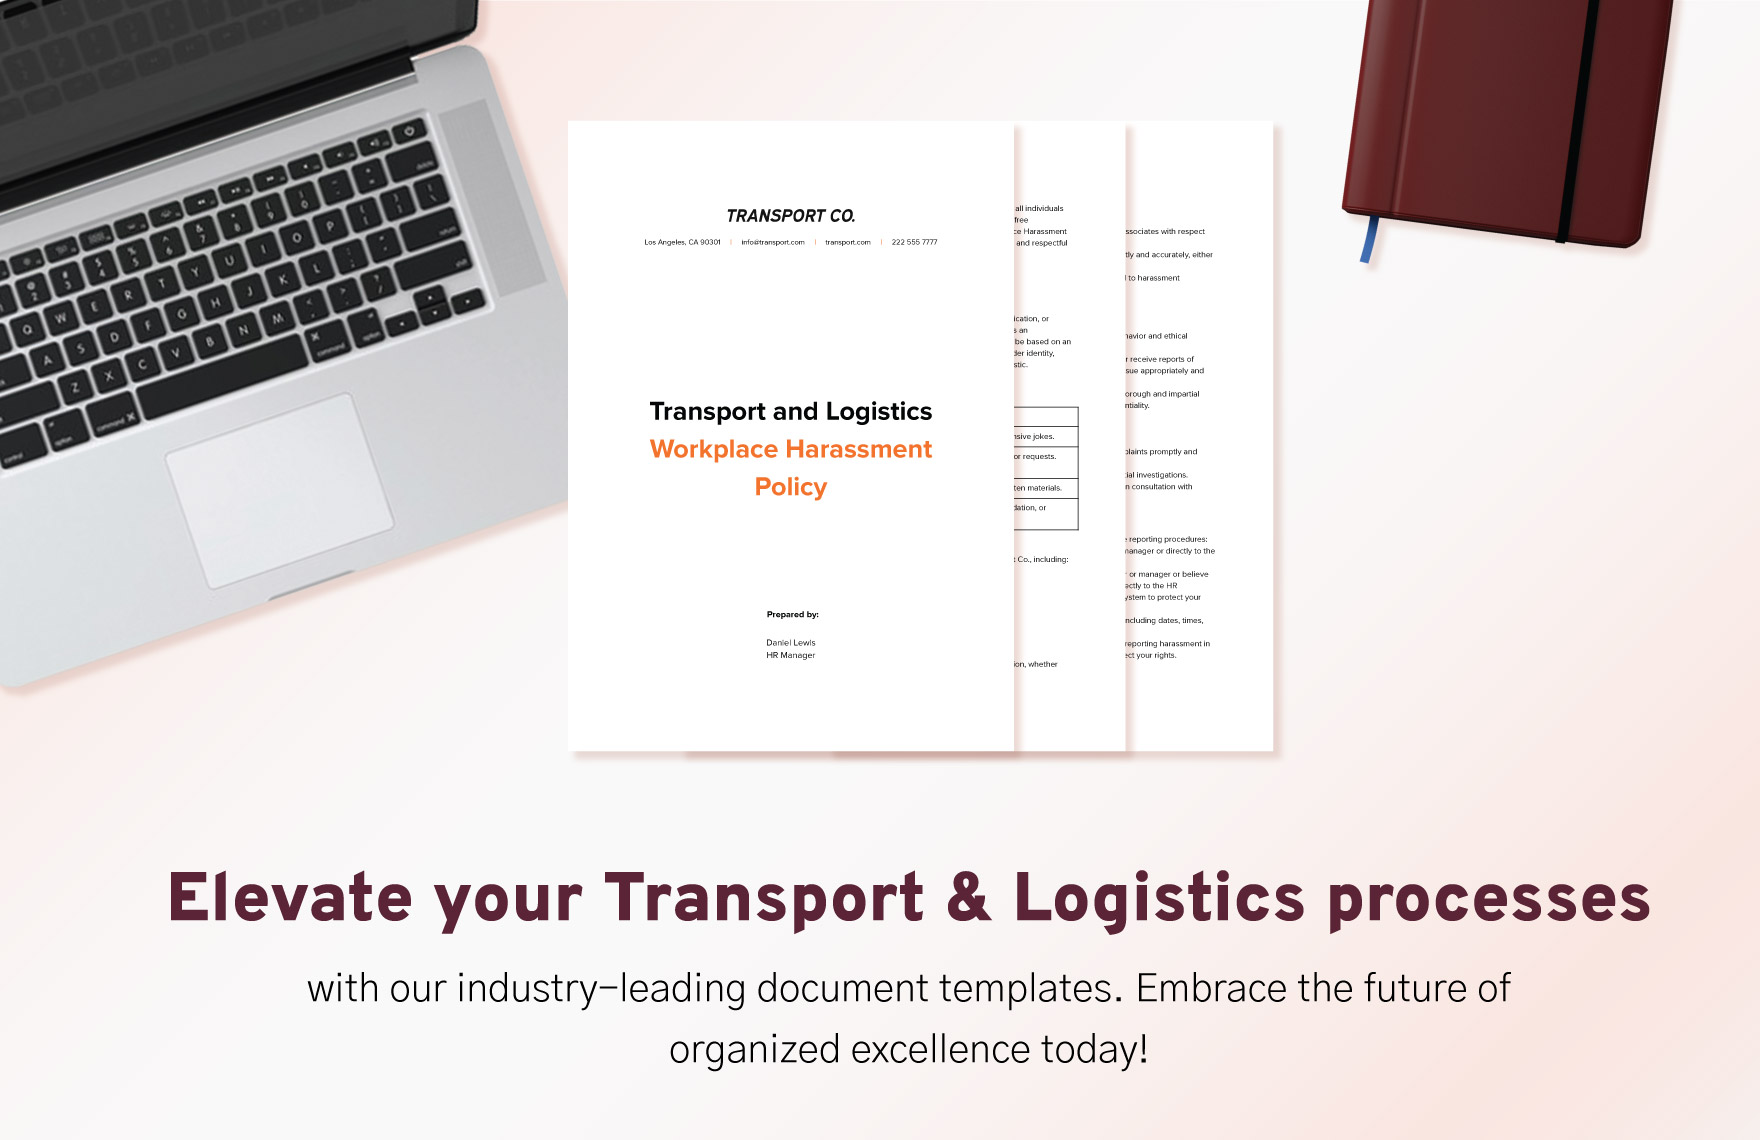 Transport and Logistics Workplace Harassment Policy Template